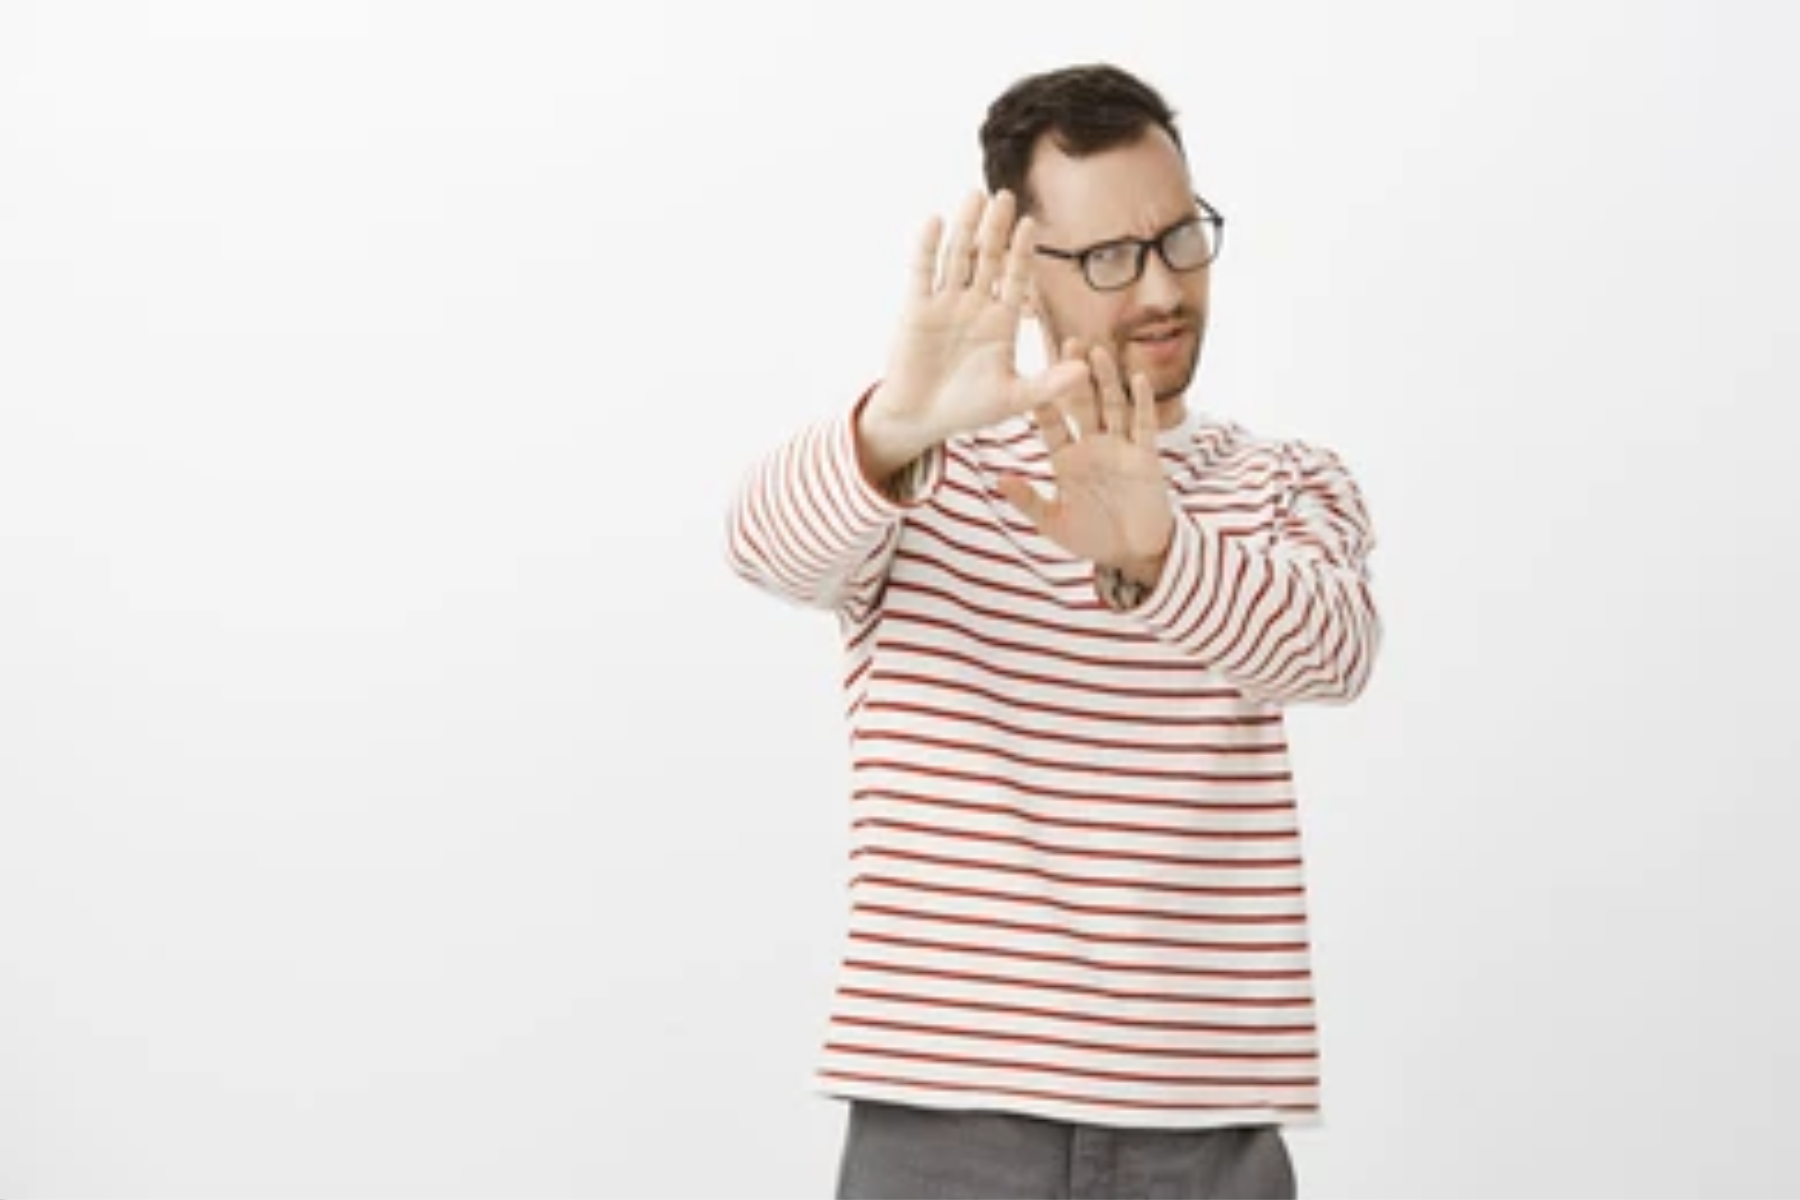 A man wearing striped-shirt does not raise his hands in front, indicating that he is picky